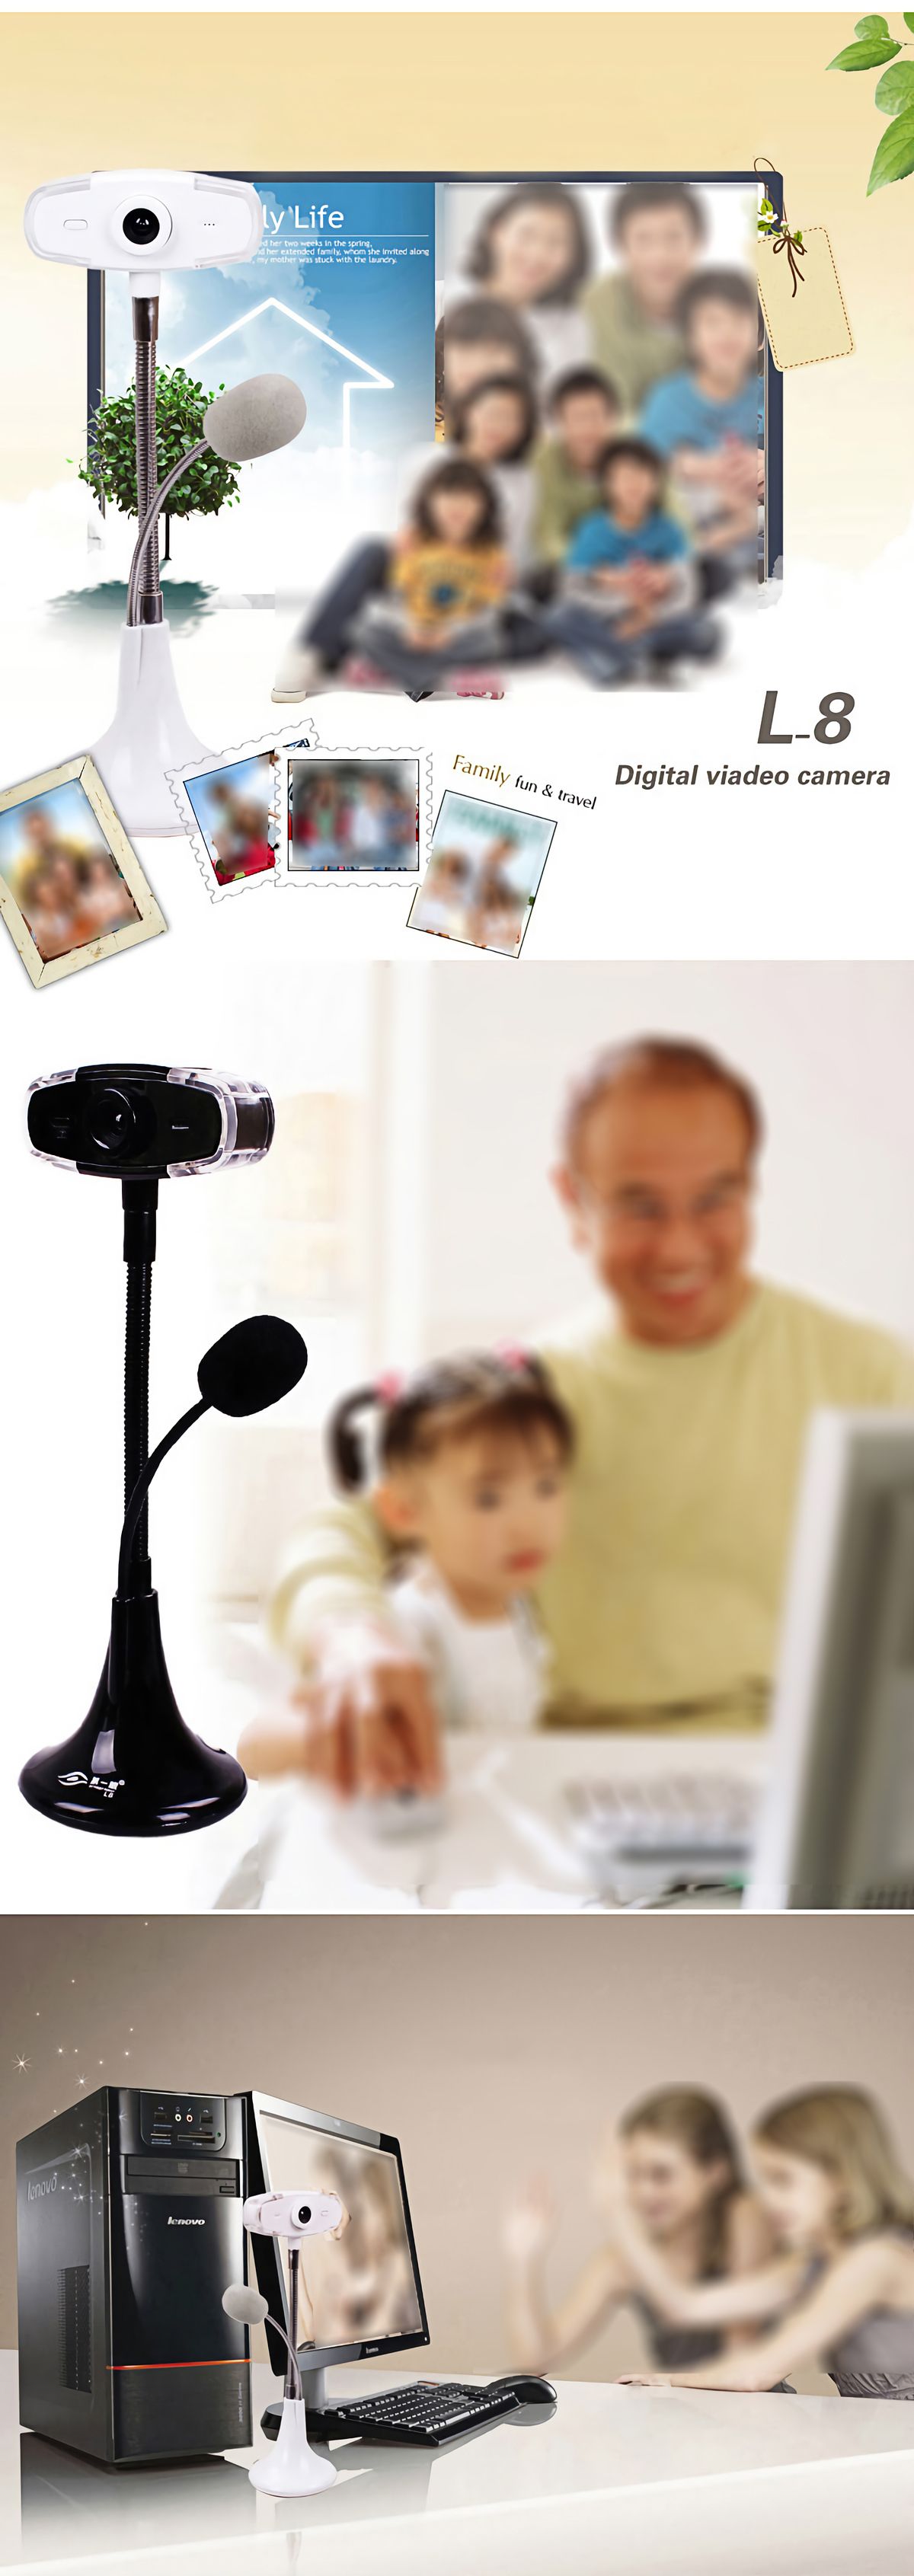 L8-HD-1080P-Webcam-CMOS-30FPS-USB-20-HD-Camera-with-Microphone-for-Desktop-Computer-Notebook-PC-1664639